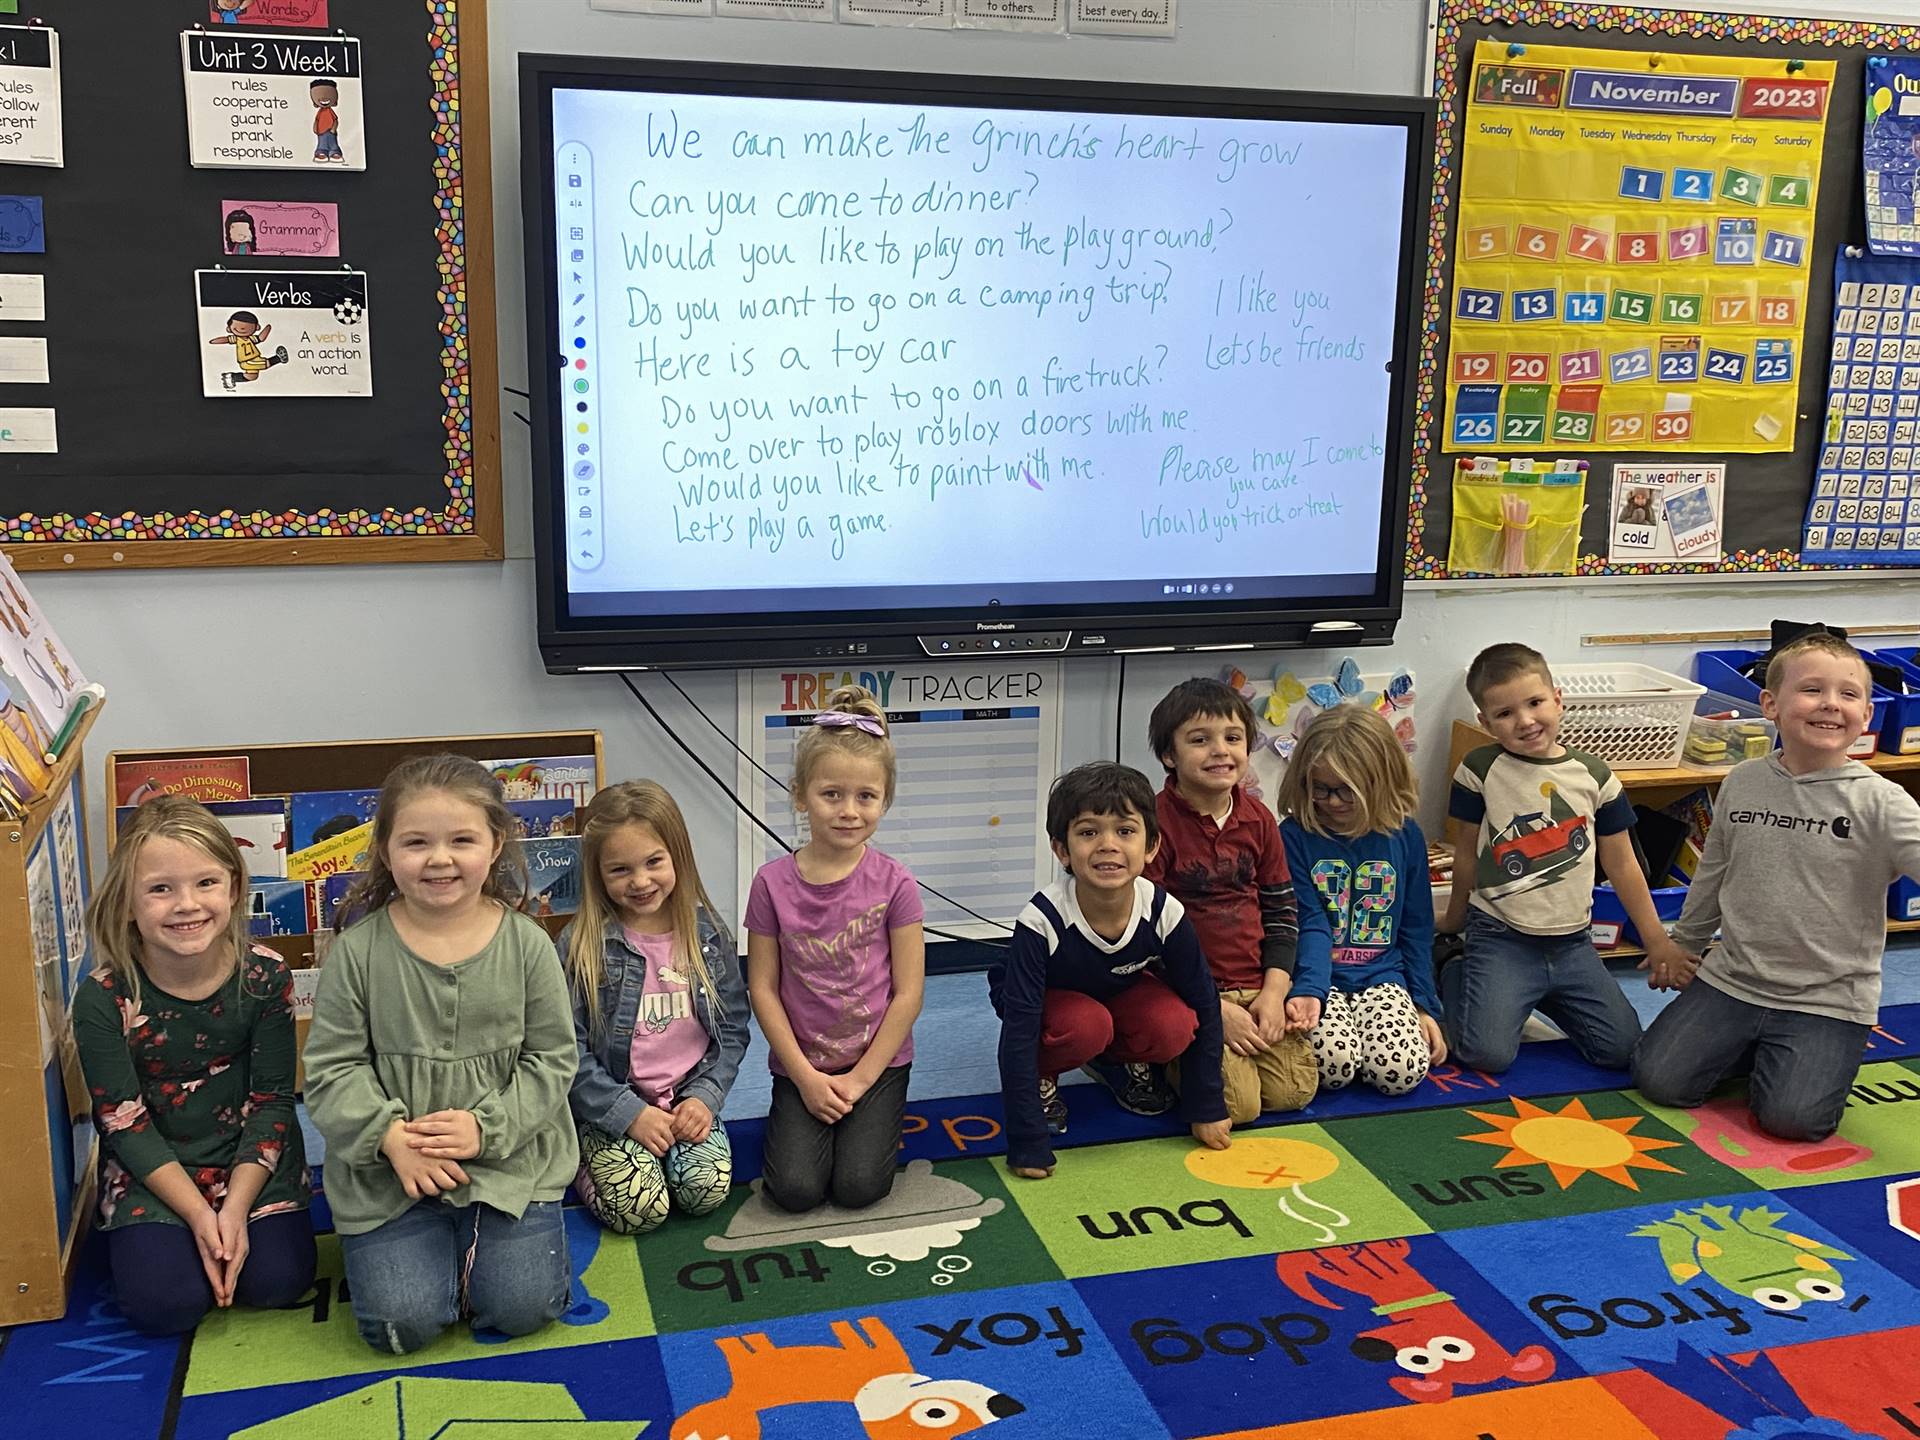 Students sit in front of whiteboard with sentences of things they would say or do to make the Grinch